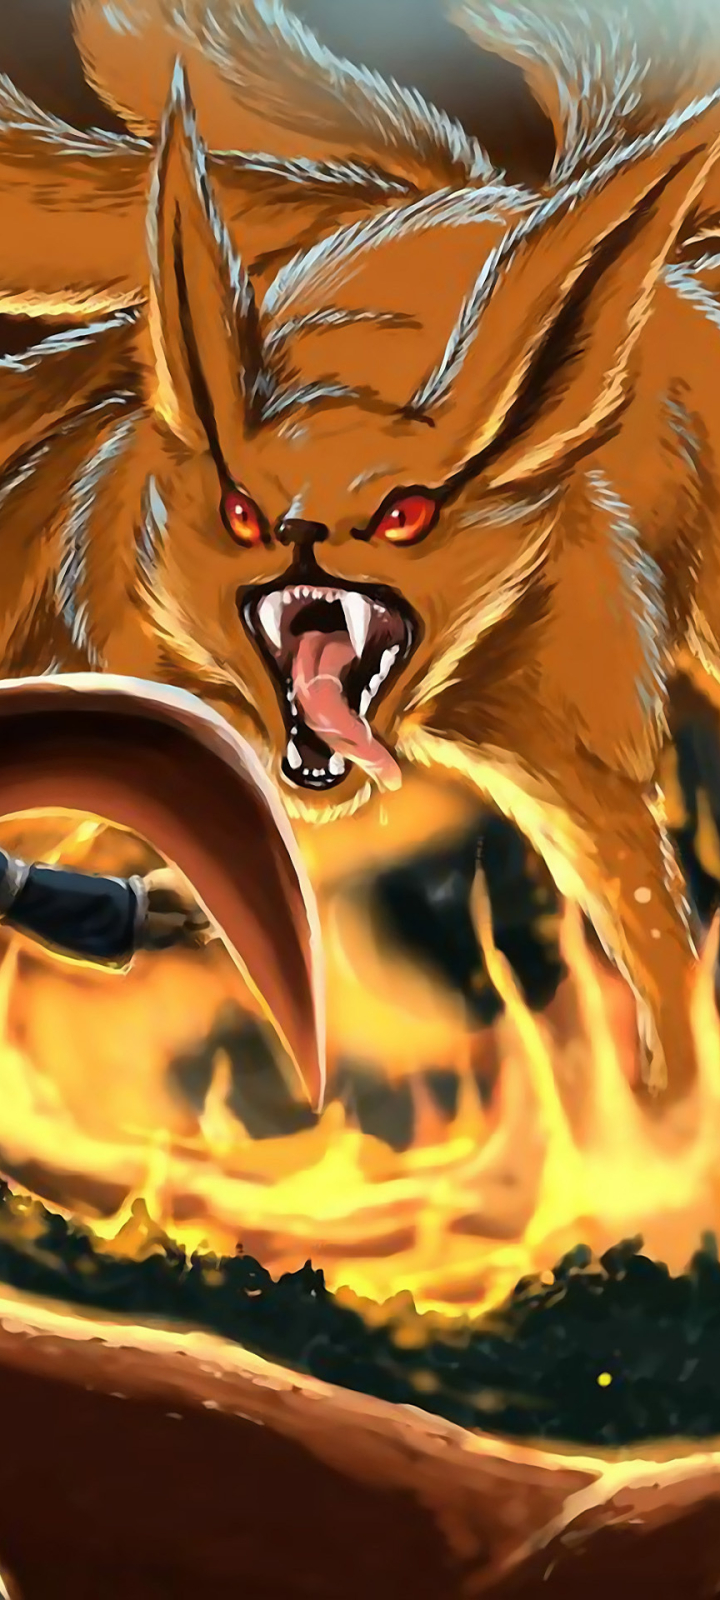 Red Fire Fox Wallpapers Background 1920x1080 Nine Tailed Fox Pictures  Background Image And Wallpaper for Free Download